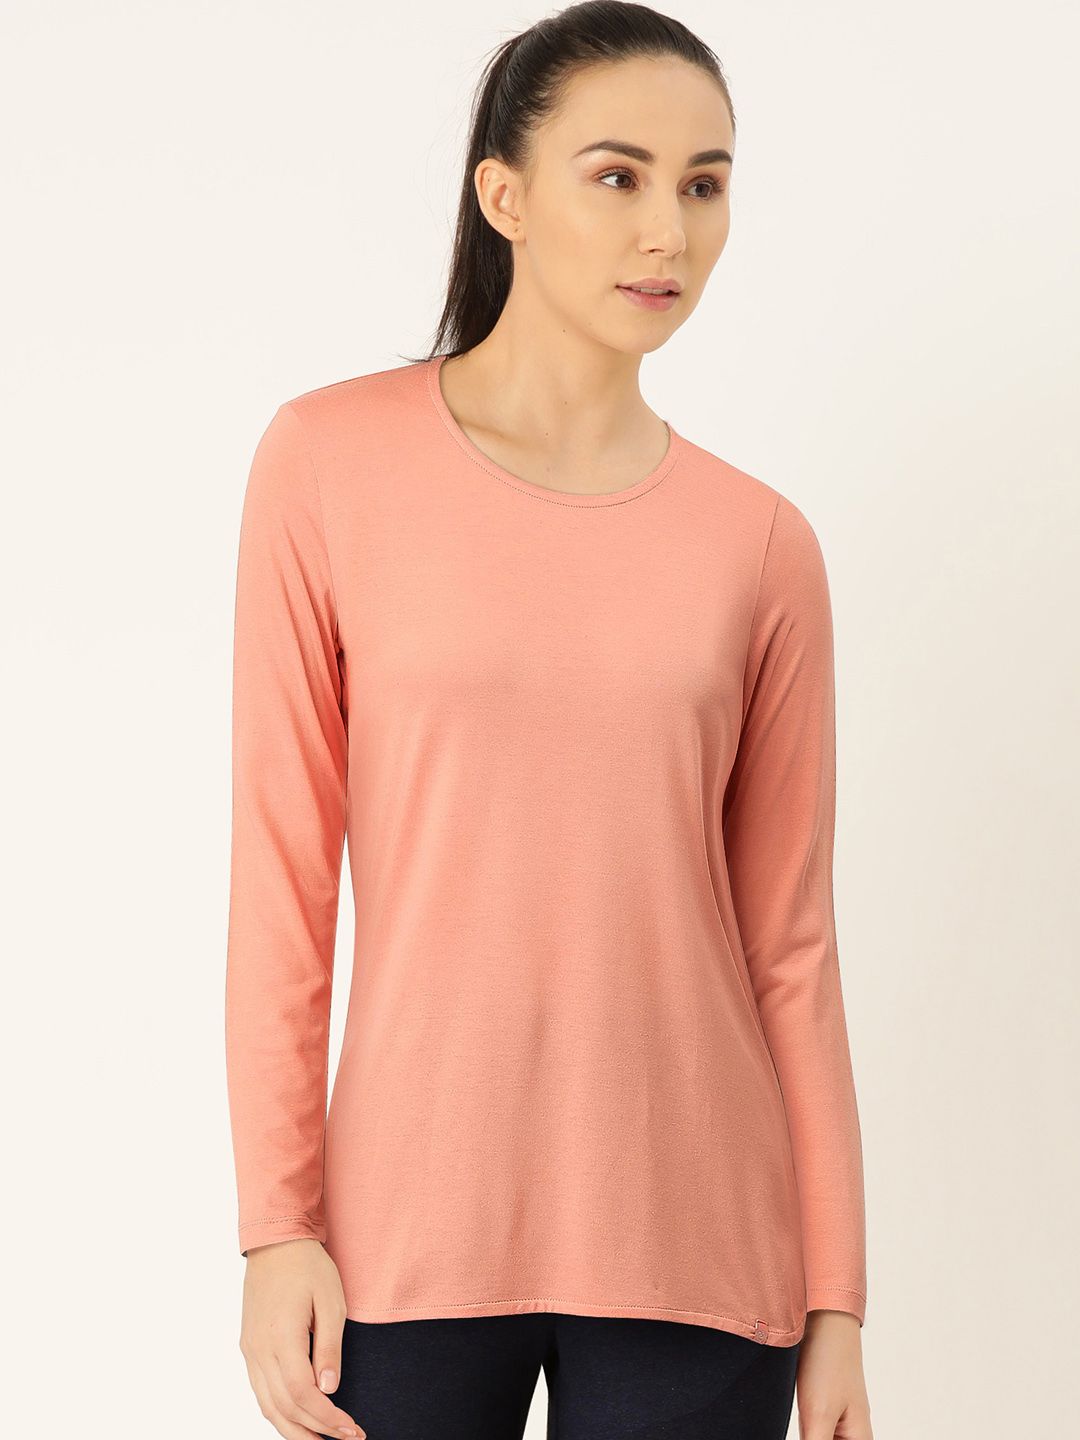 Jockey Women Peach-Coloured Solid Round Neck T-shirt Price in India